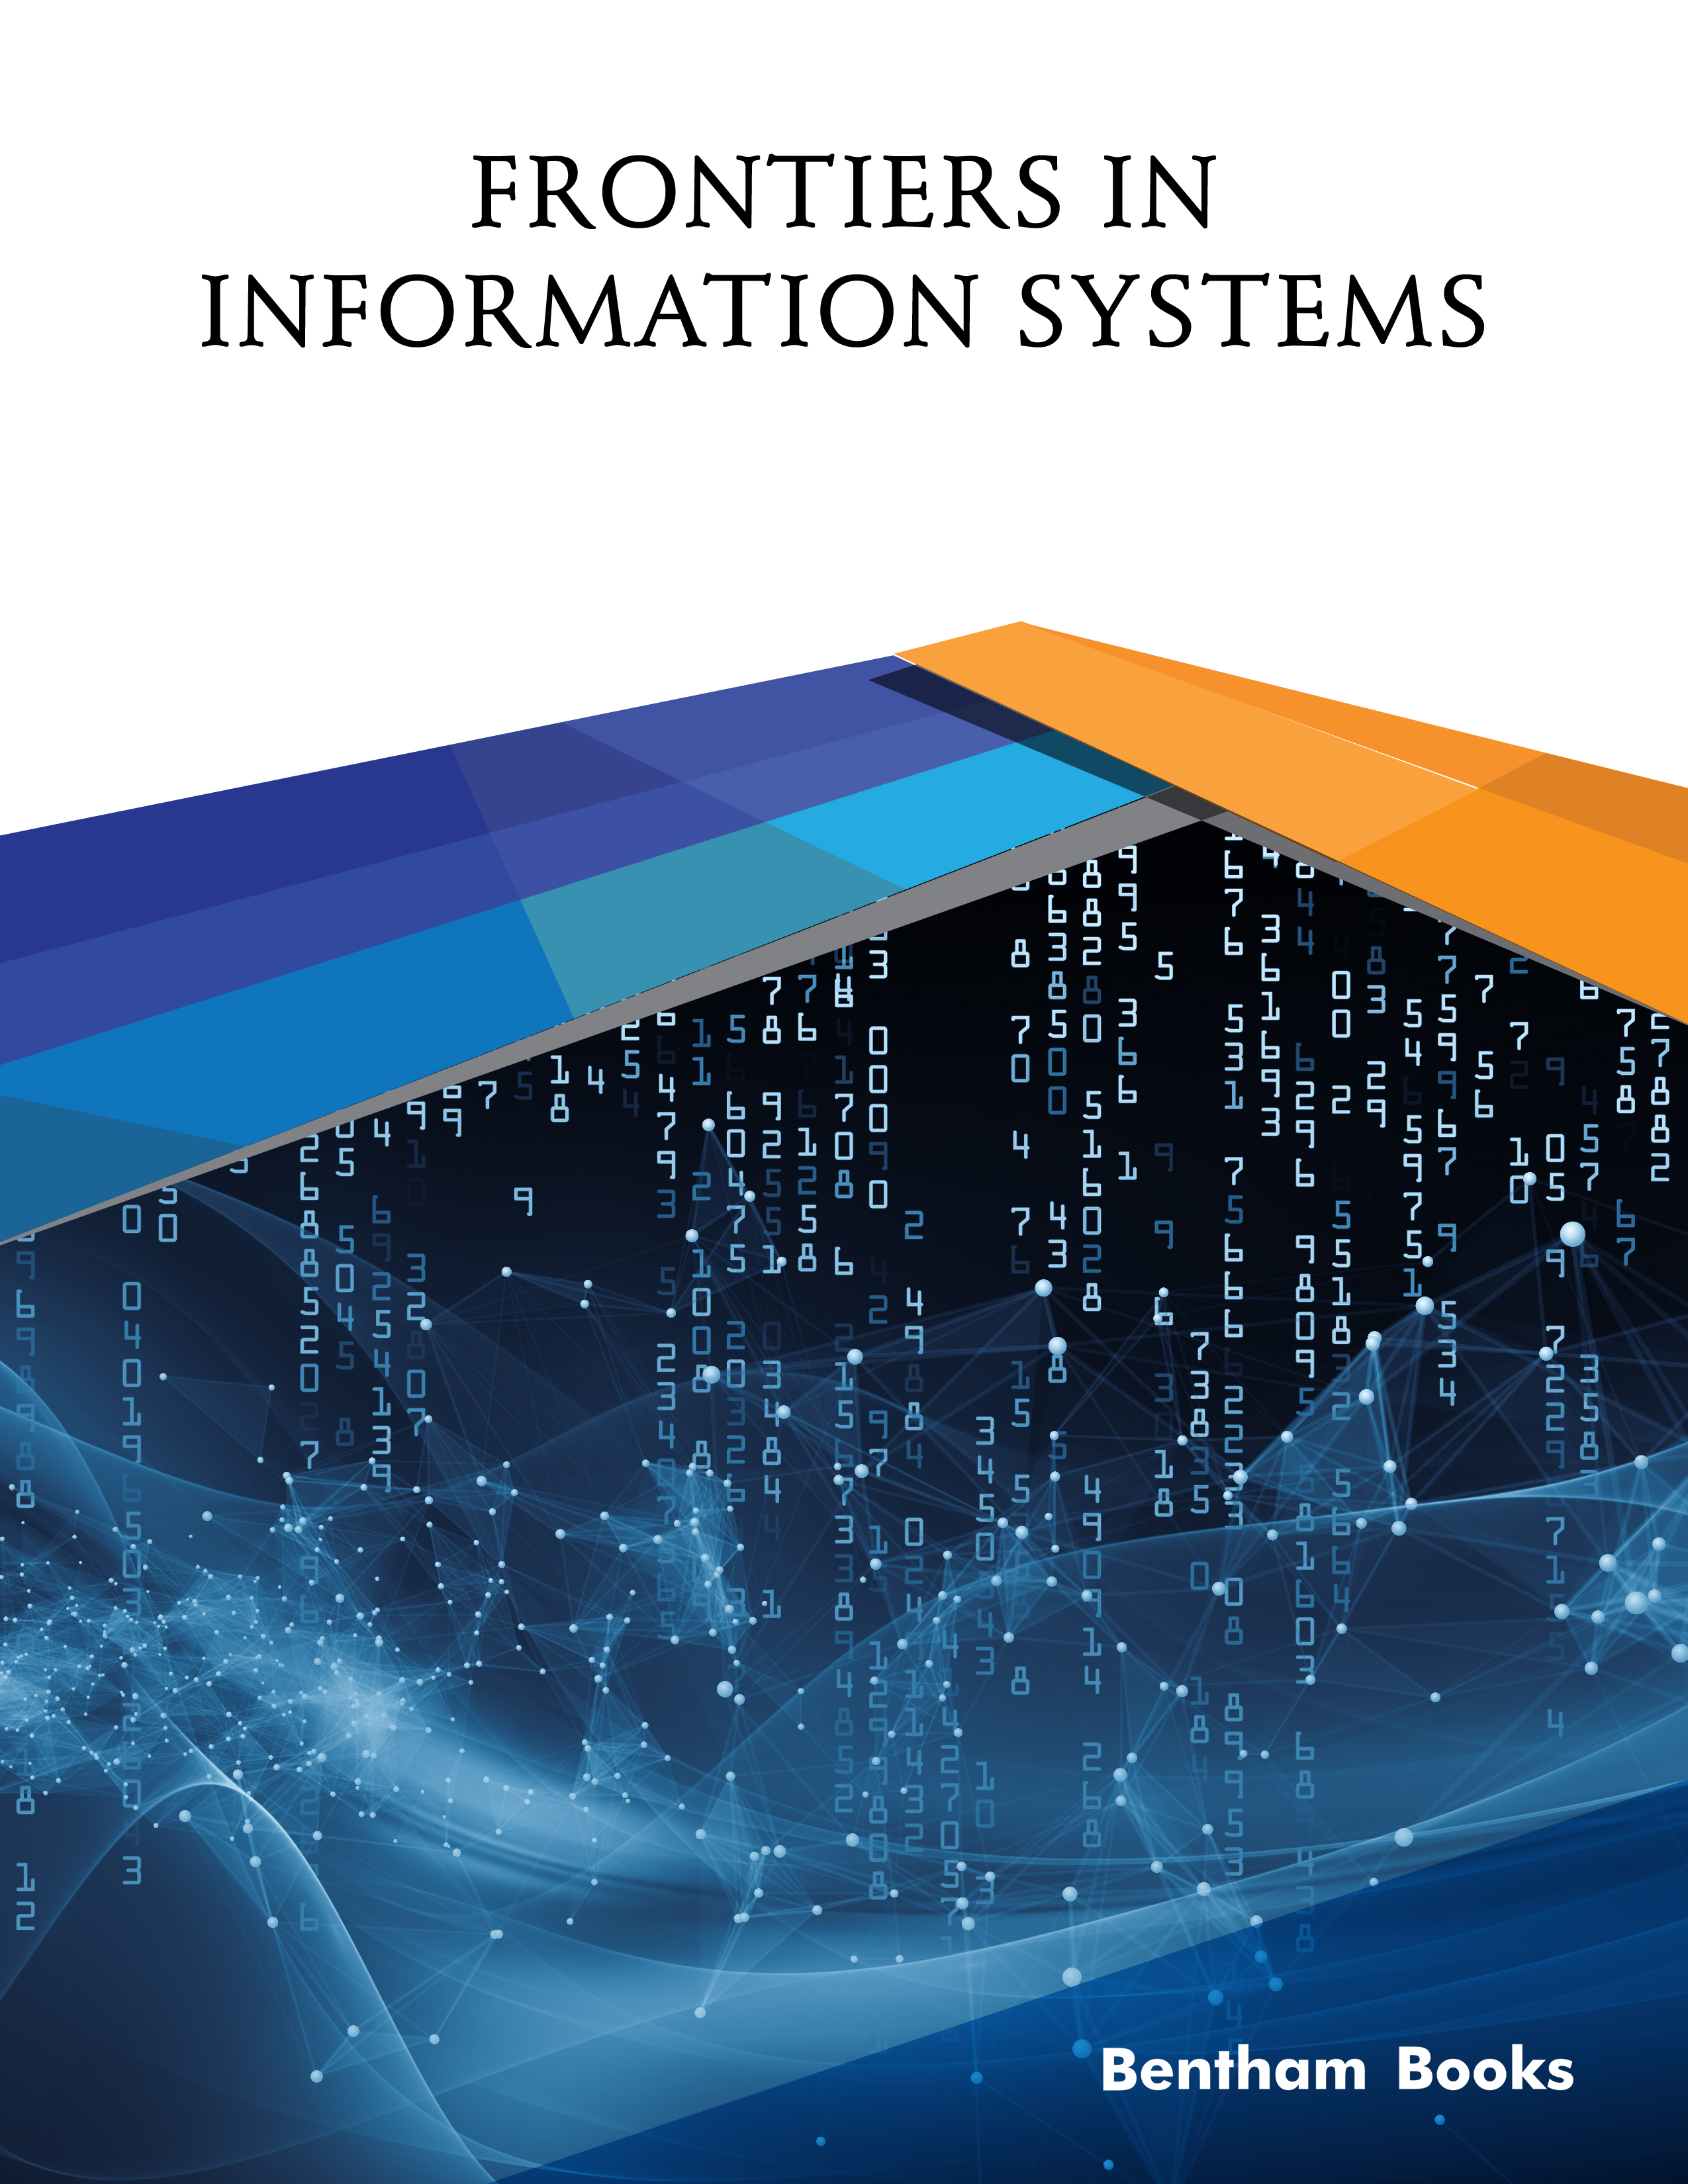 Frontiers in Information Systems